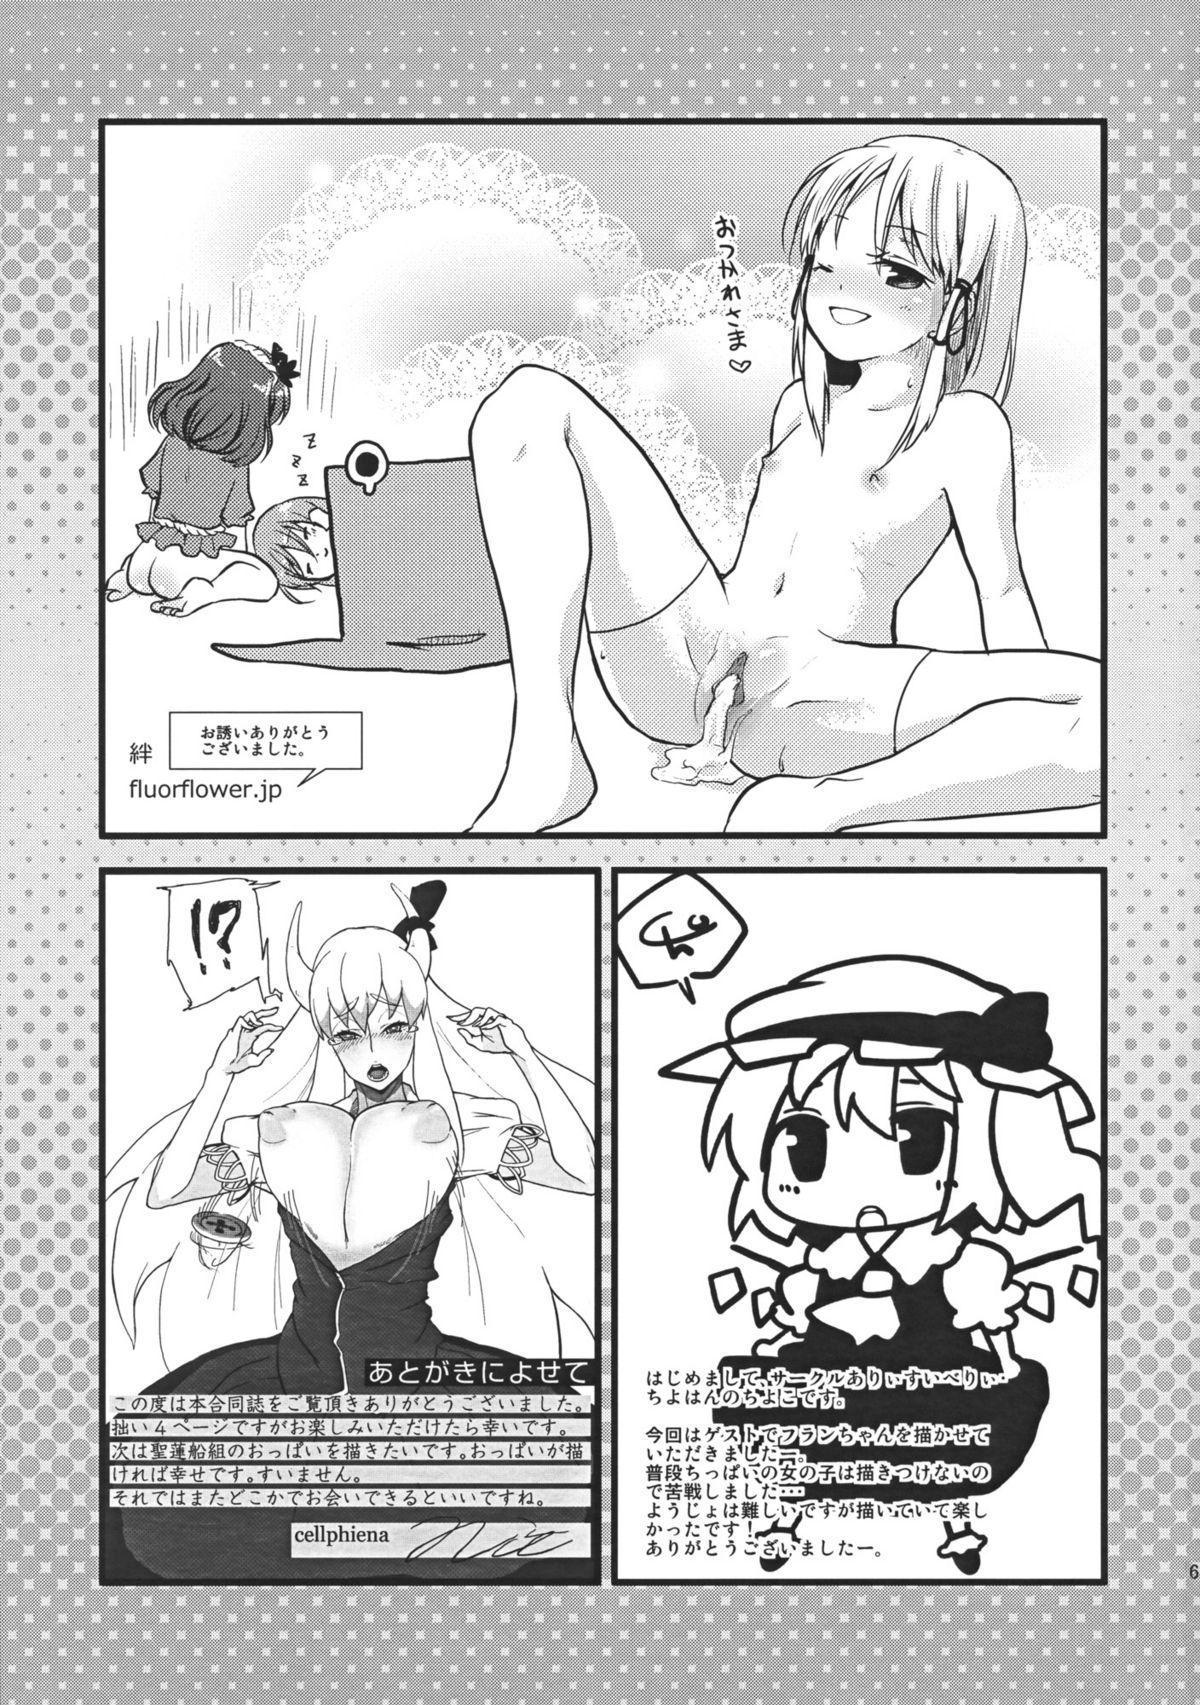 Ejaculations Koi Dorei no Susume. - Touhou project Milfporn - Page 60